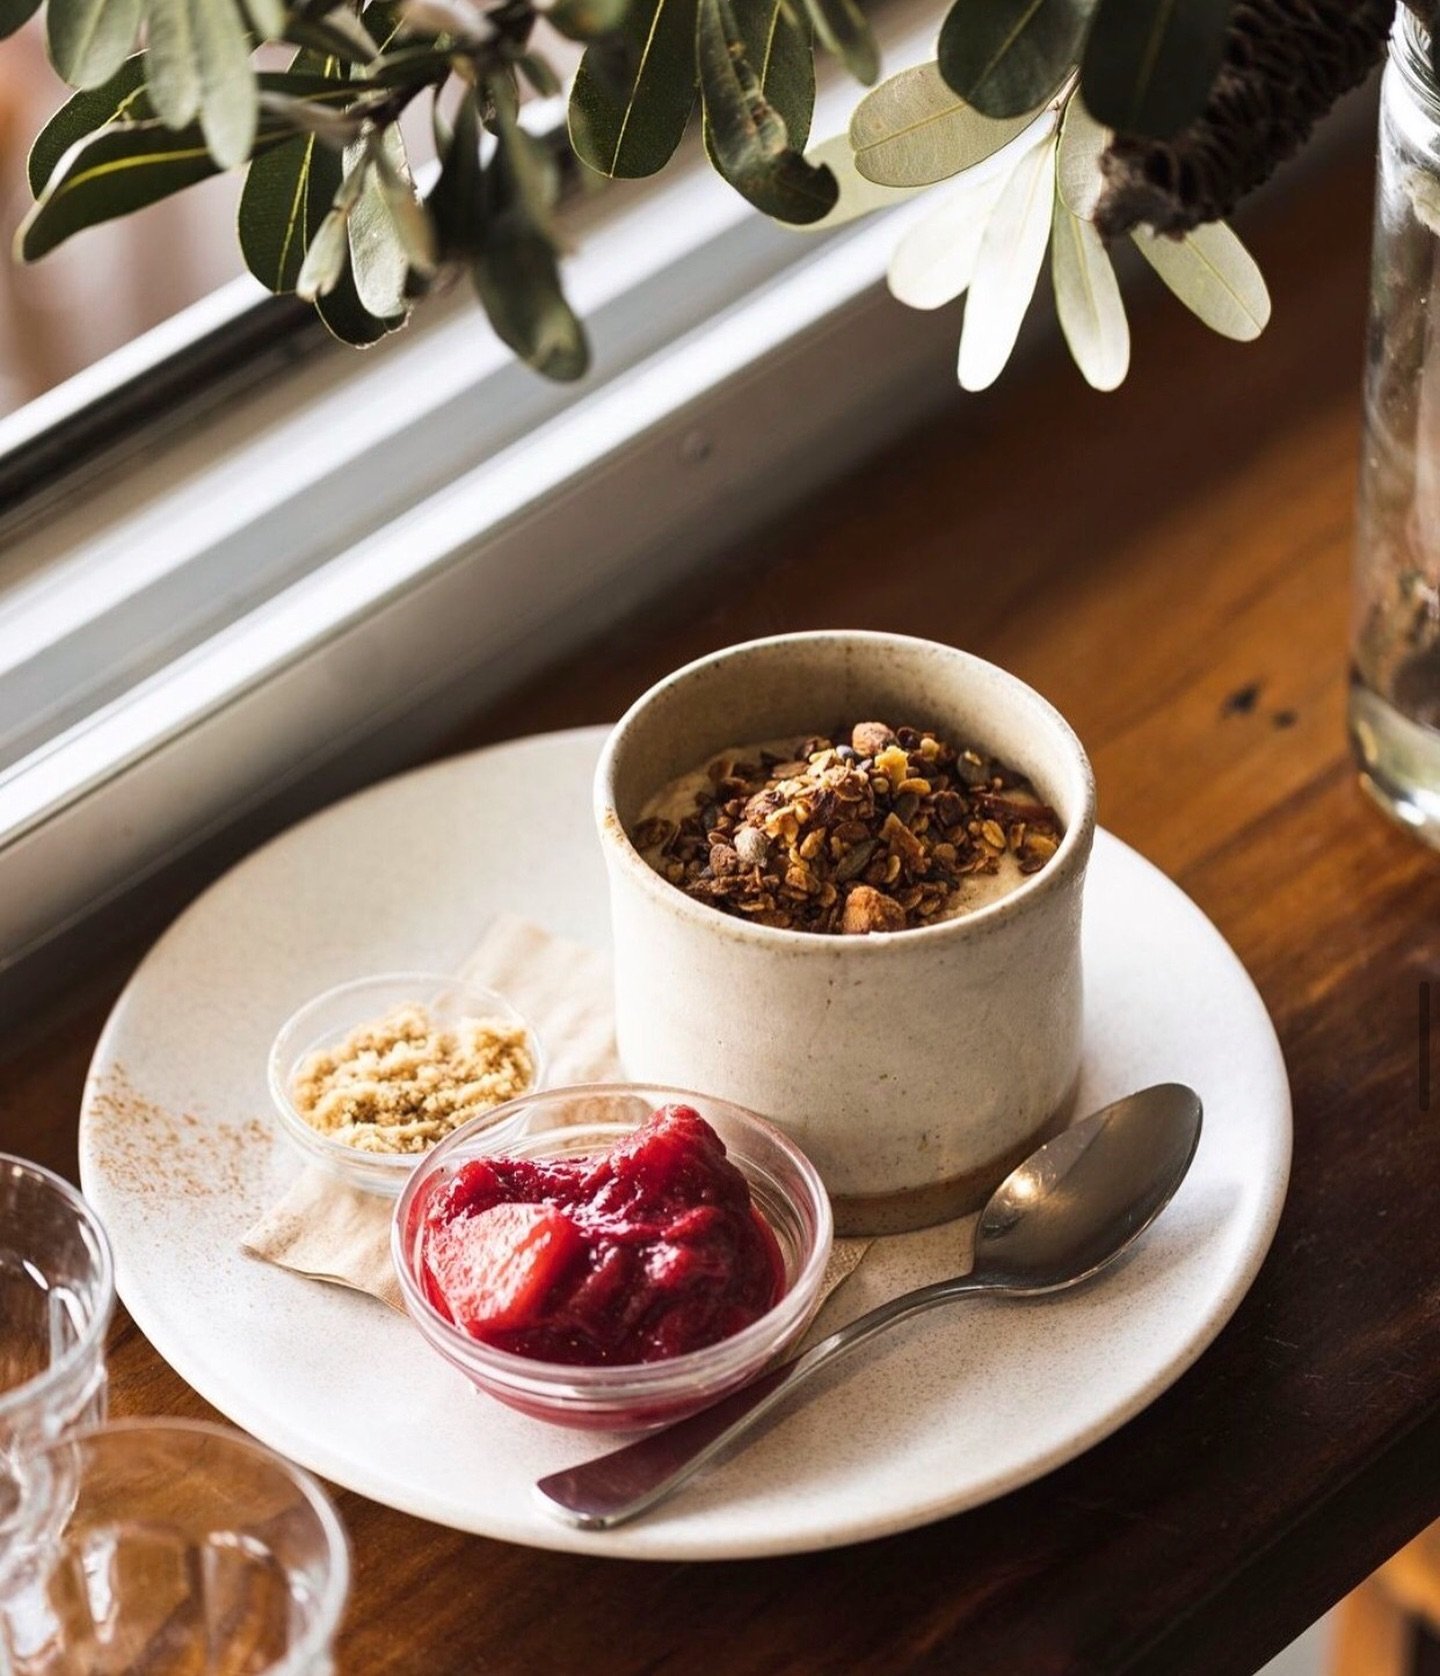 Porridge season has begun!! ✨
We&rsquo;re talking rolled oats for creaminess, steel cut oats for texture, delicious stewed rhubarb topped with our house made coconut and macadamia granola for some crunch and a side of brown sugar to add as you please